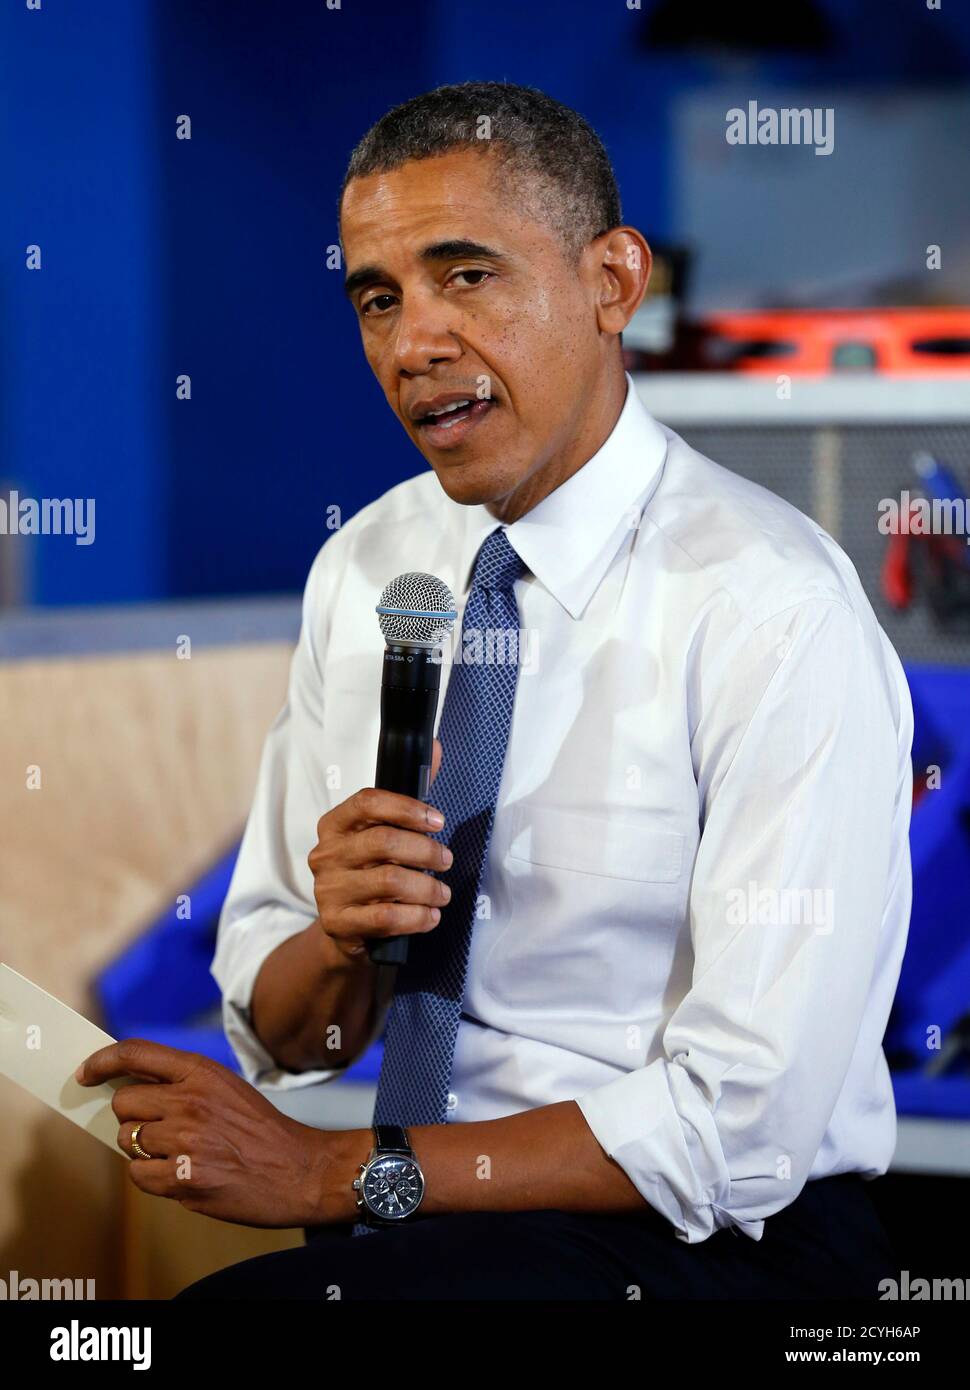 U.S. President Barack Obama speaks about Benghazi during a visit to Pittsburgh June 17, 2014. The United States said on Tuesday it had captured a suspected ringleader of the 2012 attack on the U.S. diplomatic compound in Benghazi, Libya, a raid that killed four Americans including the U.S. ambassador and ignited a political firestorm in Washington.  REUTERS/Kevin Lamarque  (UNITED STATES - Tags: POLITICS) Stock Photo